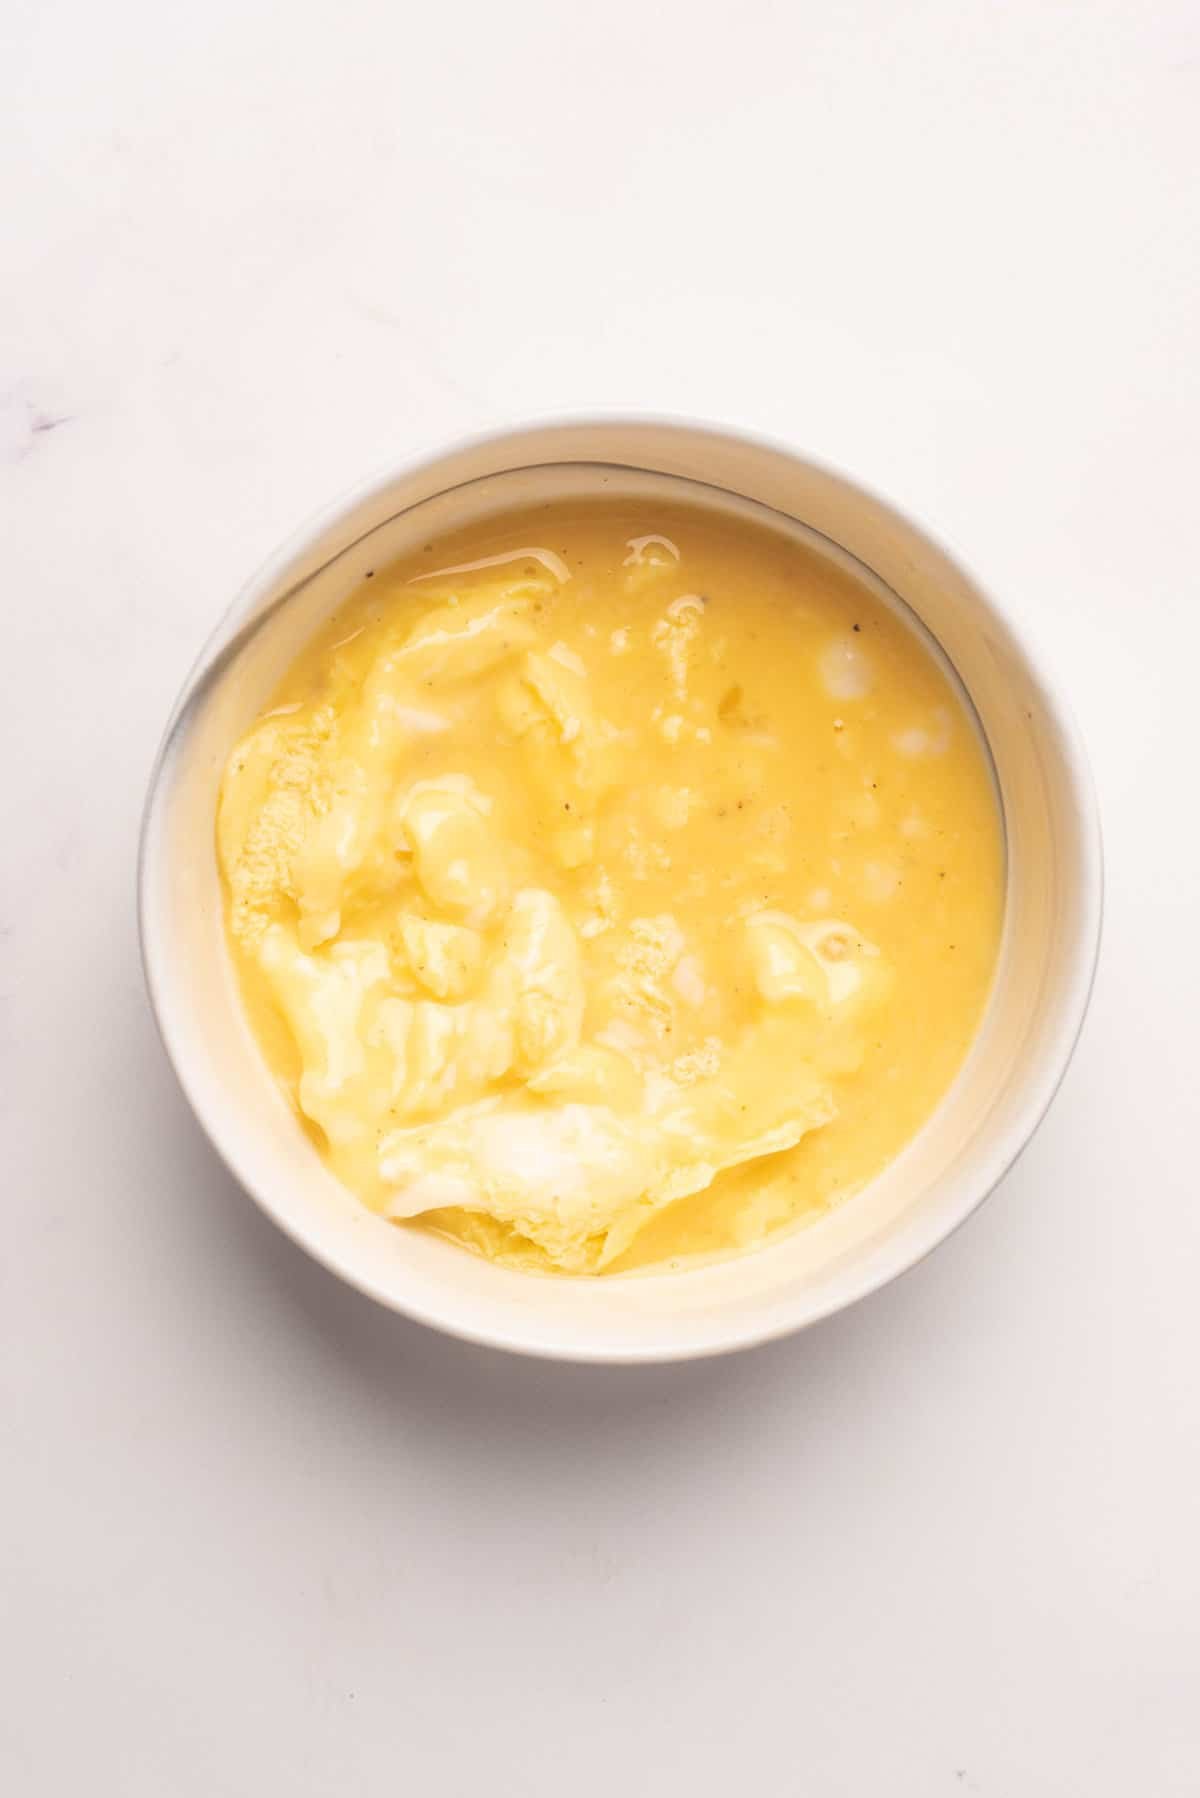 An overhead image of eggs mixture in a ramekin after microwaving for 1 and a half minutes.